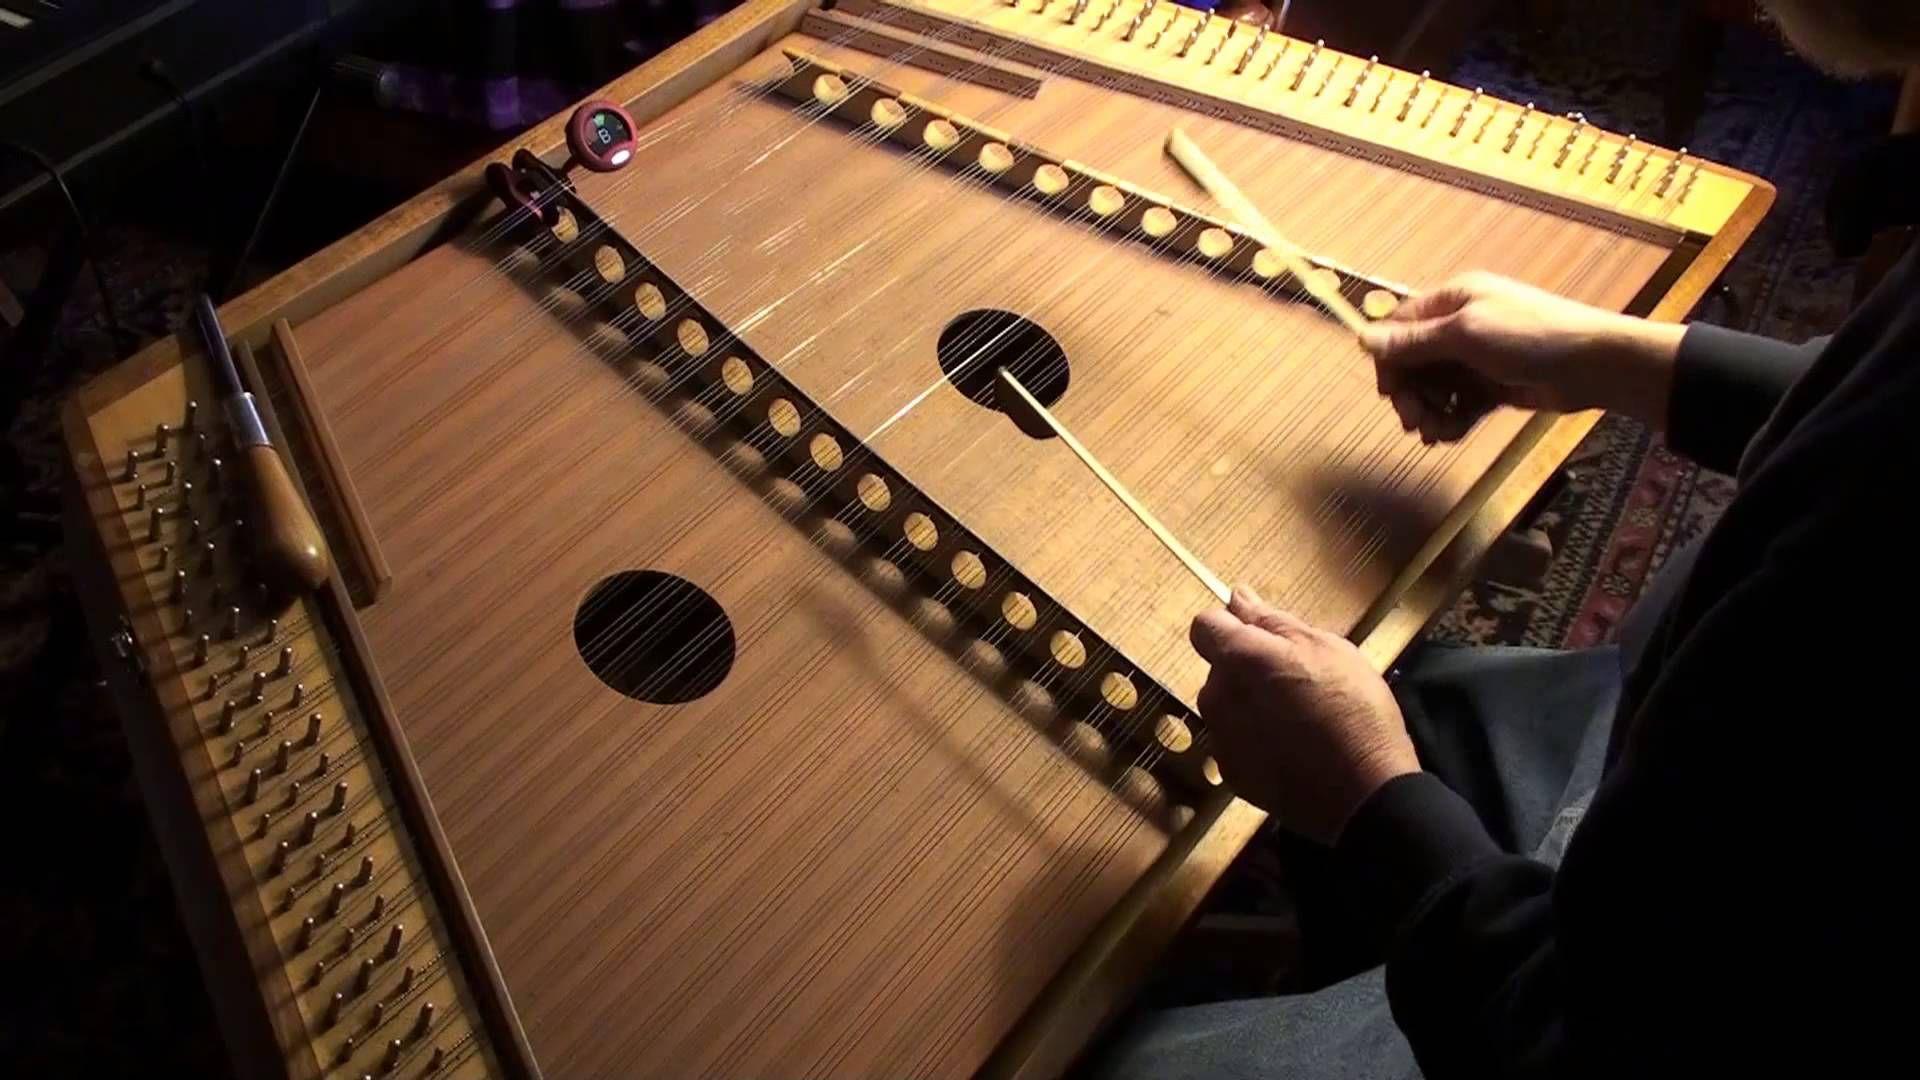 The Ash Grove played by Bill Spence on the hammered dulcimer. LORD